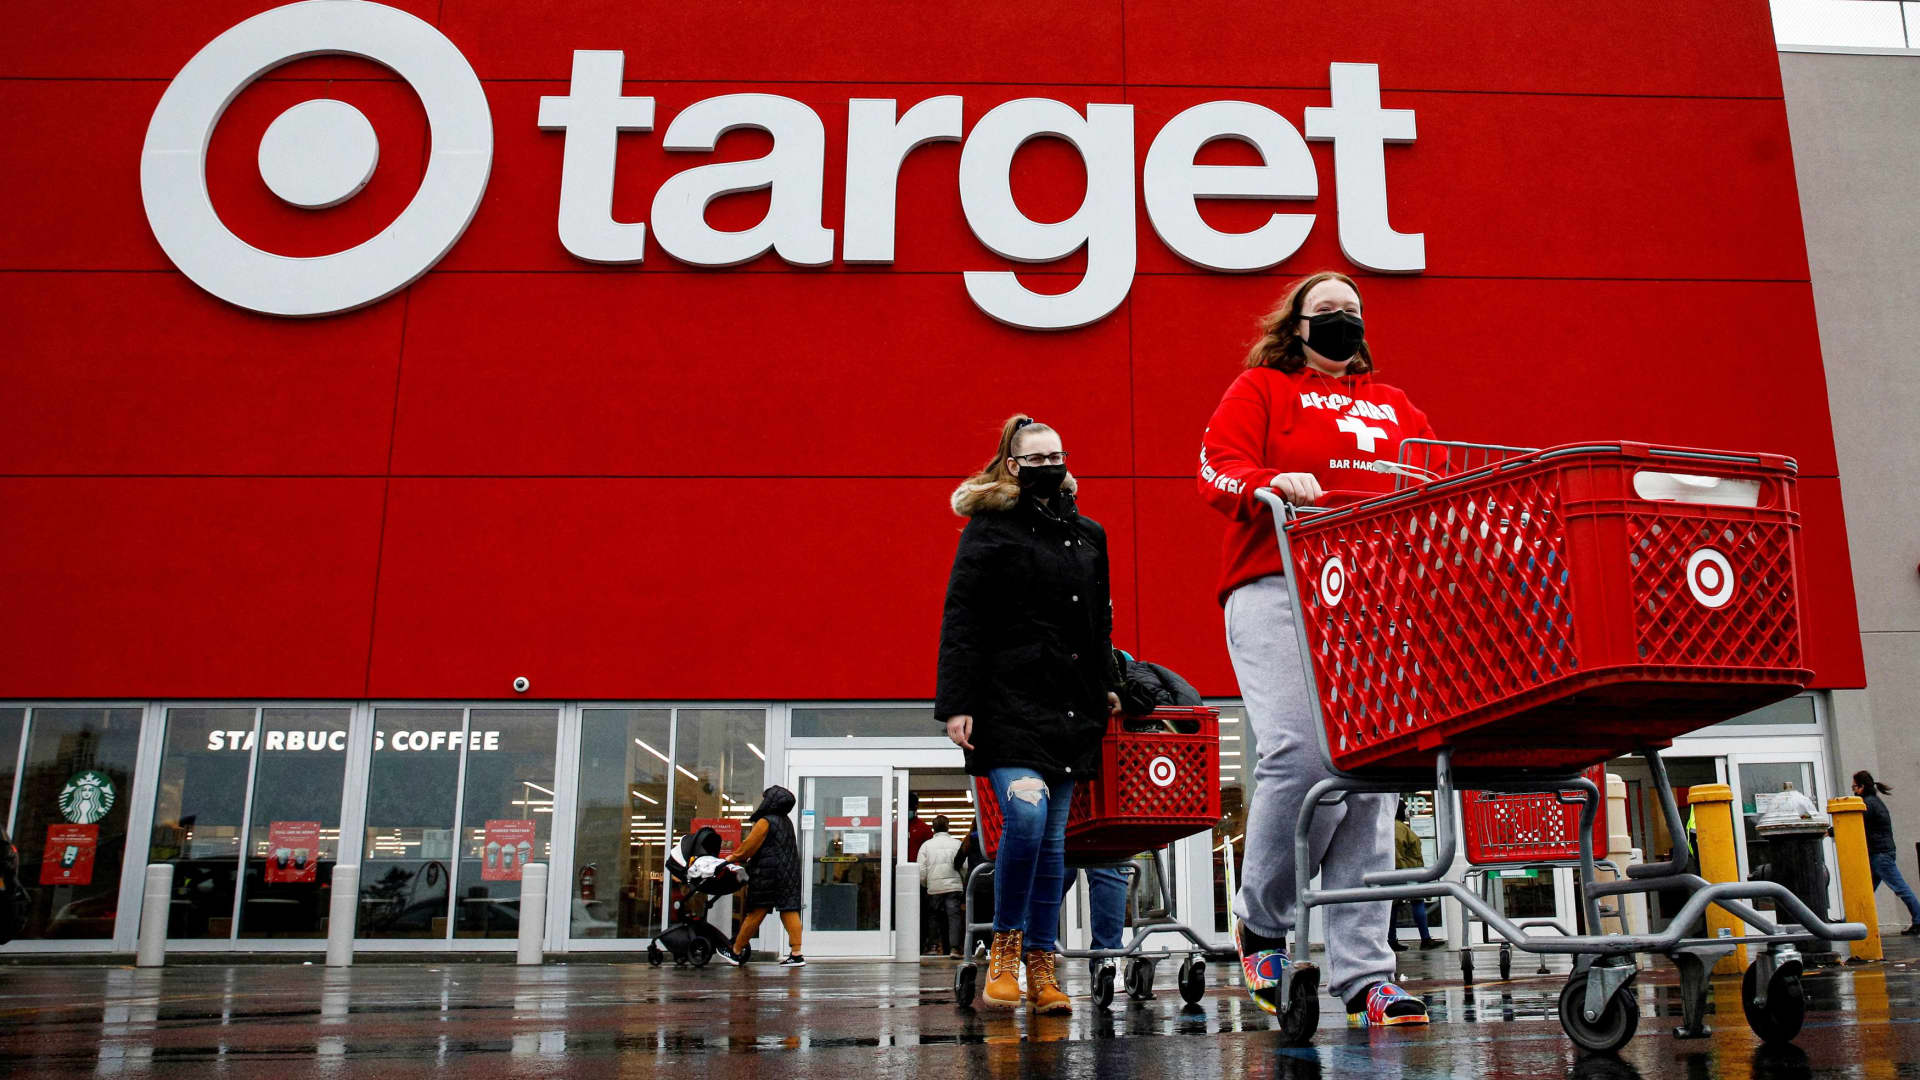 Target and Microsoft may be just the beginning of a worrisome earnings trend